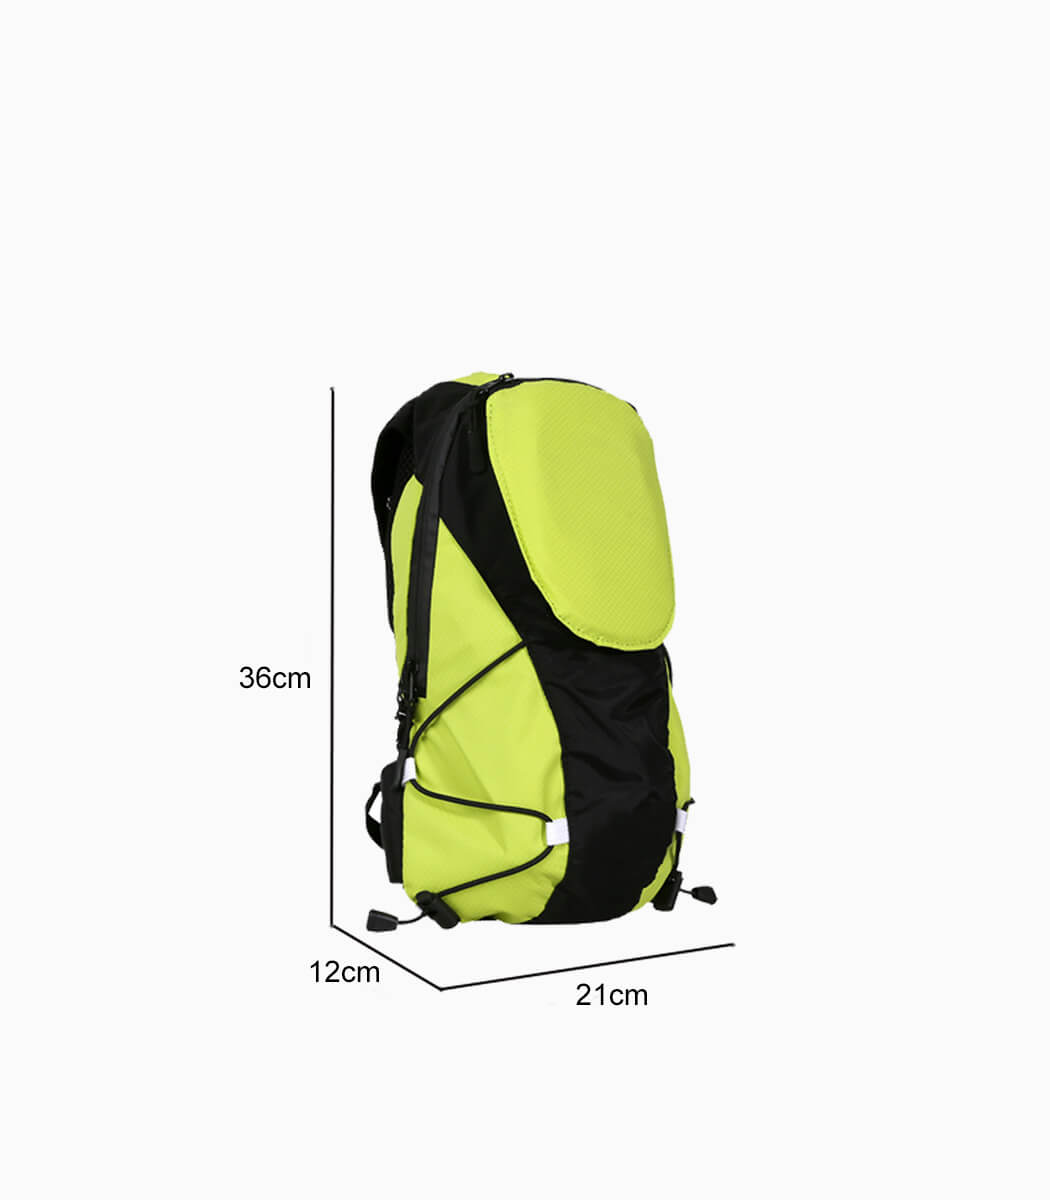 LIGHT ARMOR BP (LIME) cycling backpack with signal lights dimensions